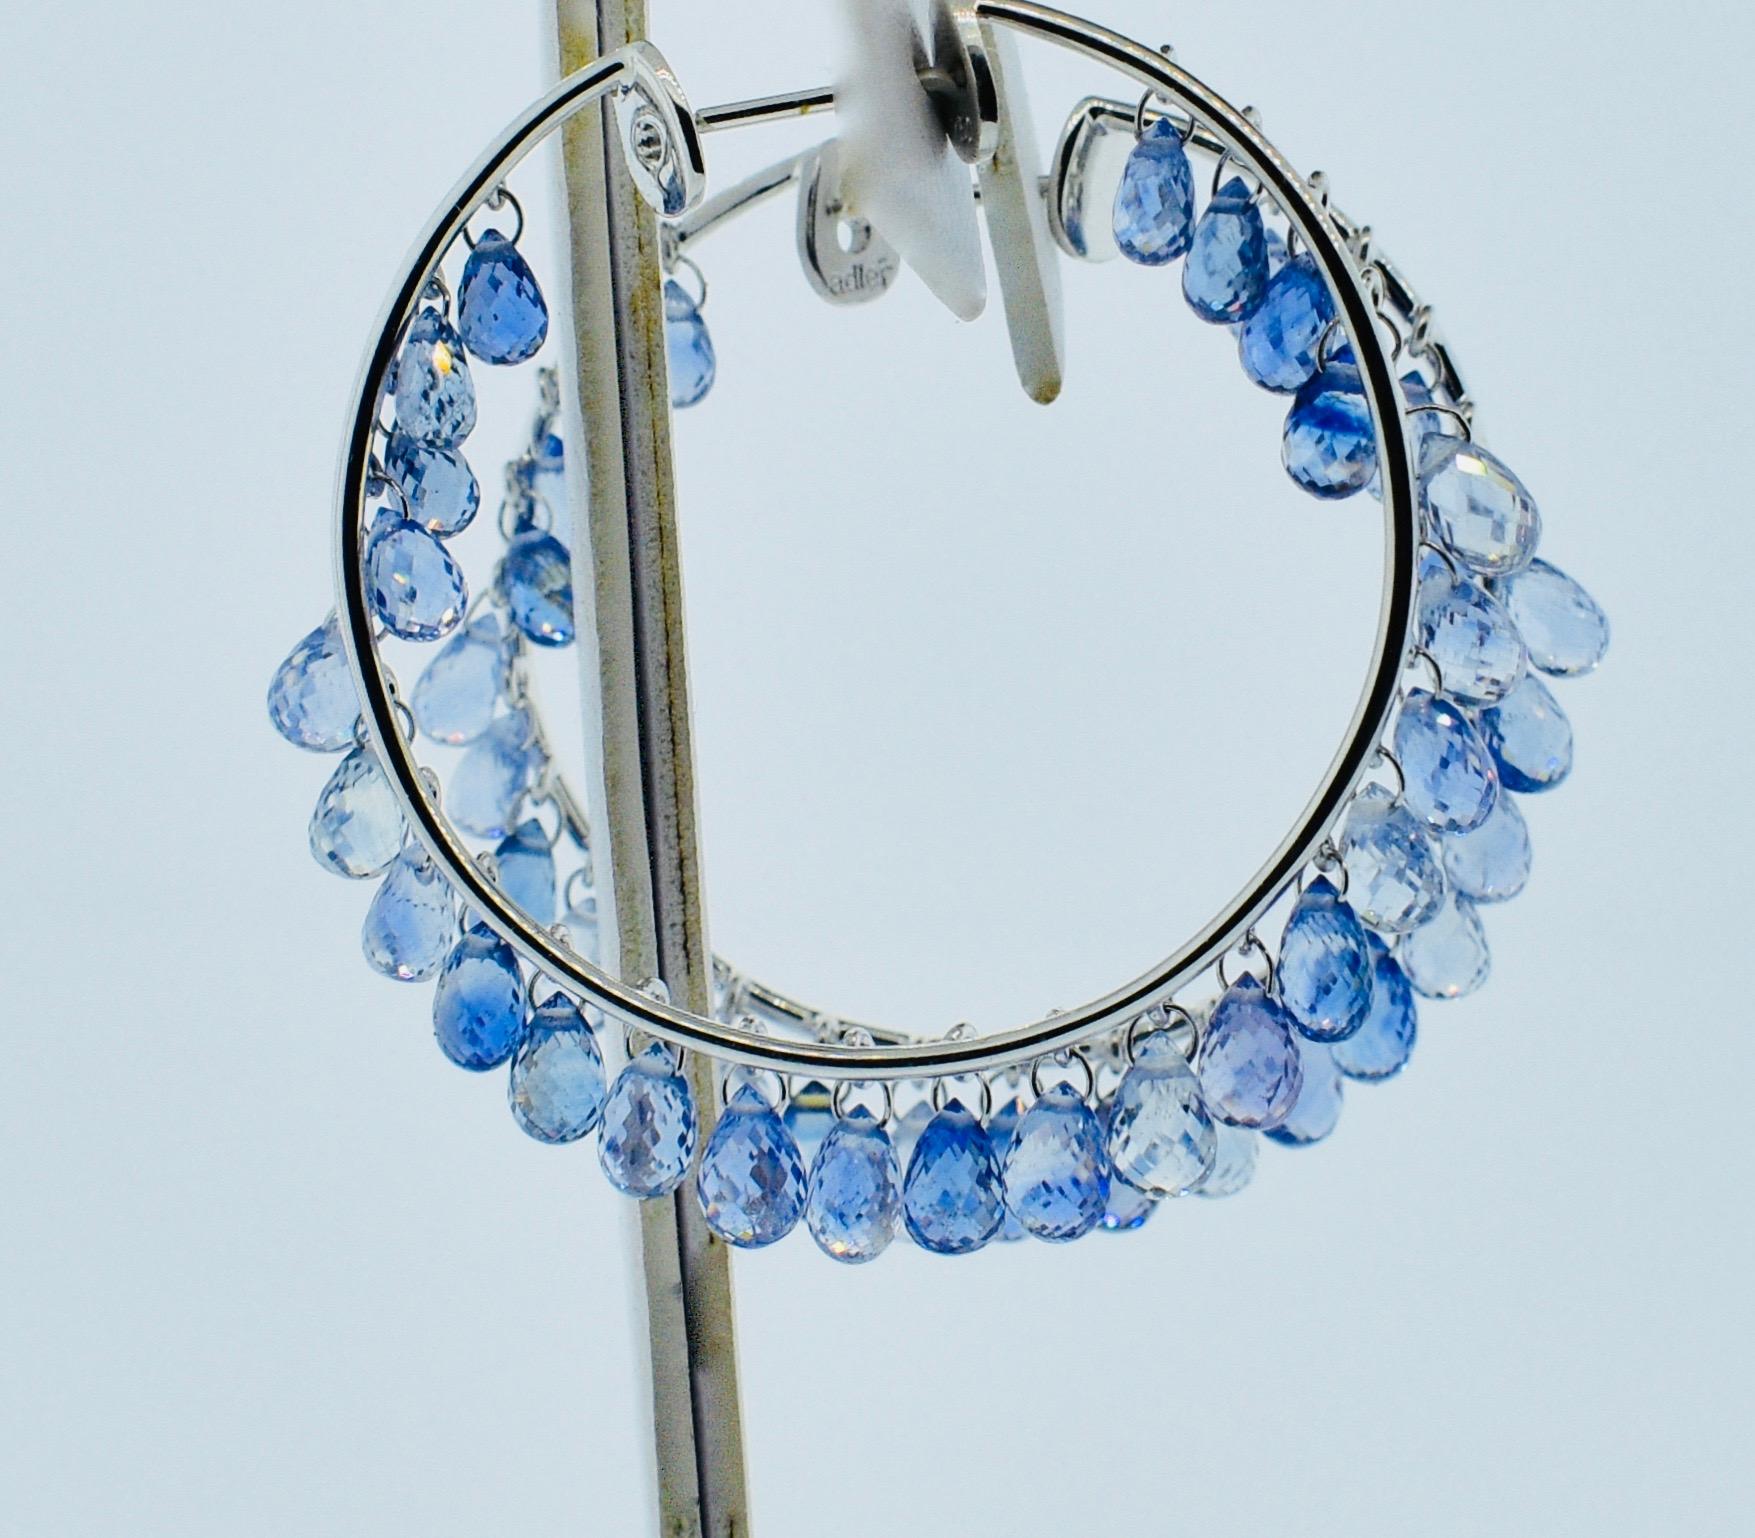 Adler - the fine jewelry house in Geneva has hand made a very distinctive large hoop style earrings.  50 briolette cut natural sapphires weighing 10 cts.  the interior dimensions of these stylish hoops are 1.5 inches.  The medium to light blue